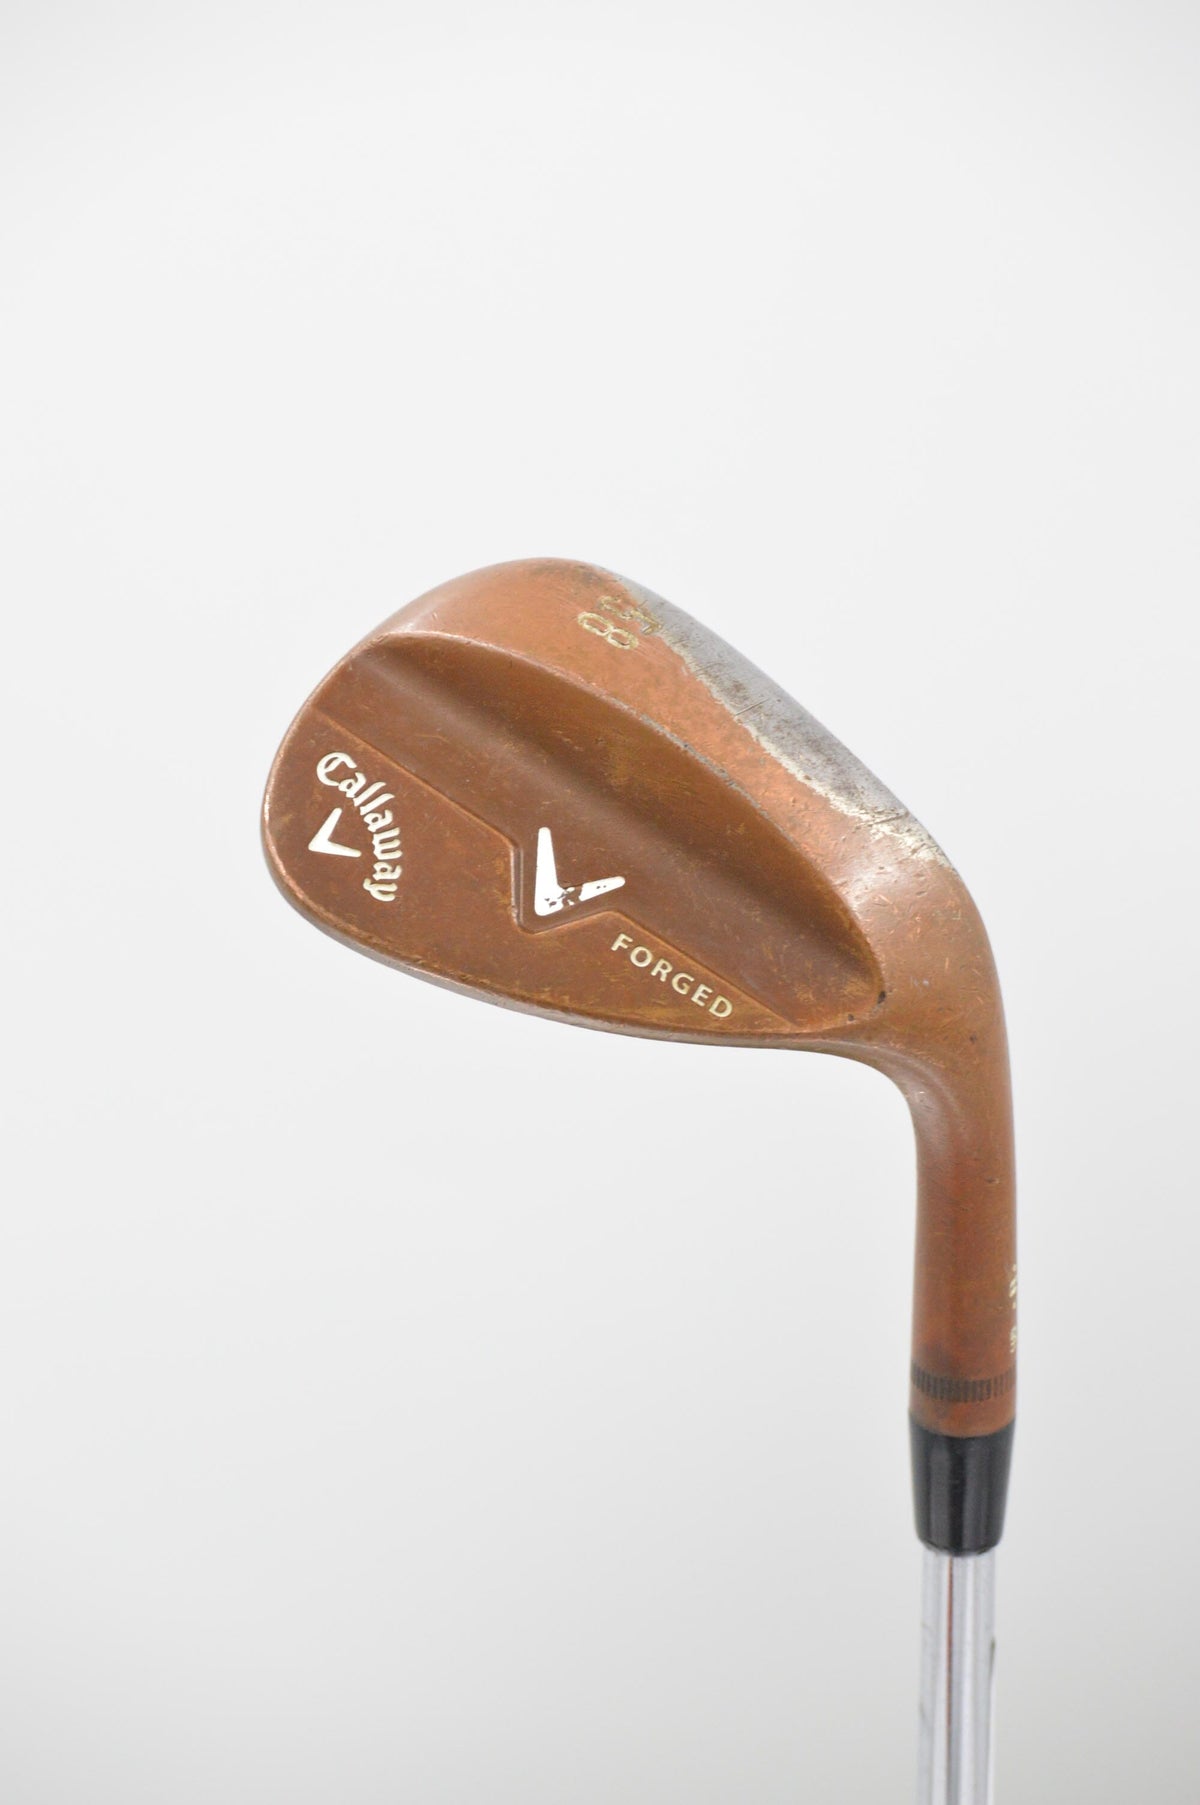 Callaway Forged Copper 58 Degree Wedge Wedge Flex Golf Clubs GolfRoots 